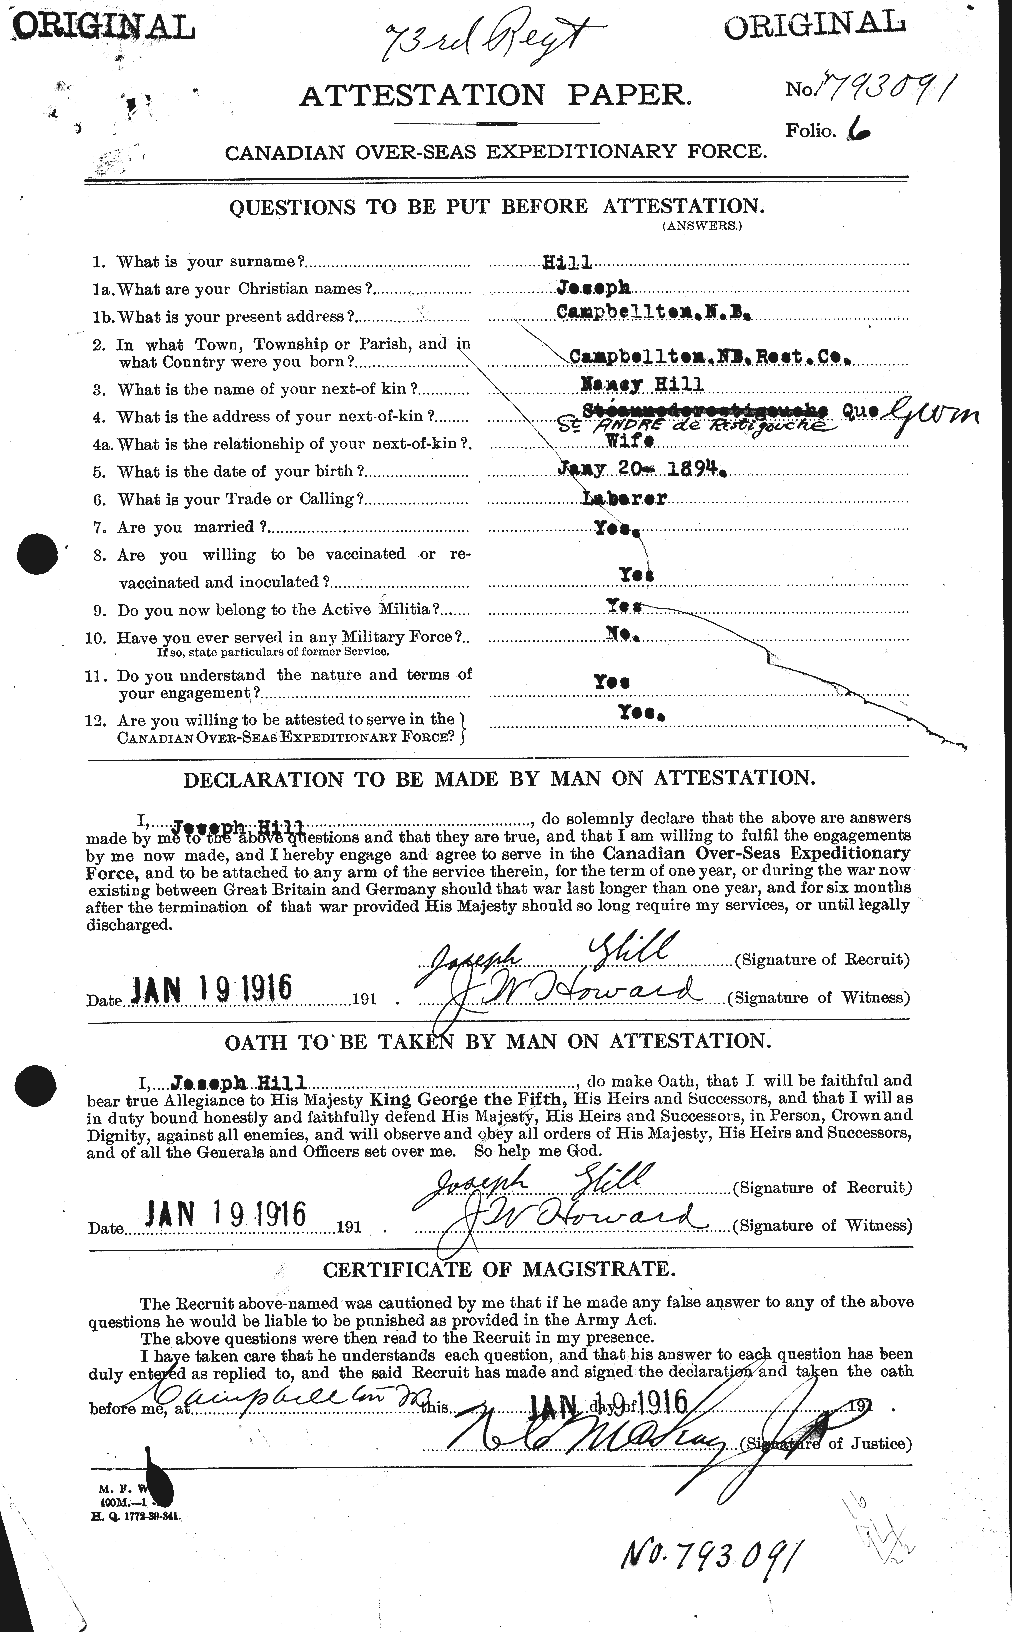 Personnel Records of the First World War - CEF 404211a